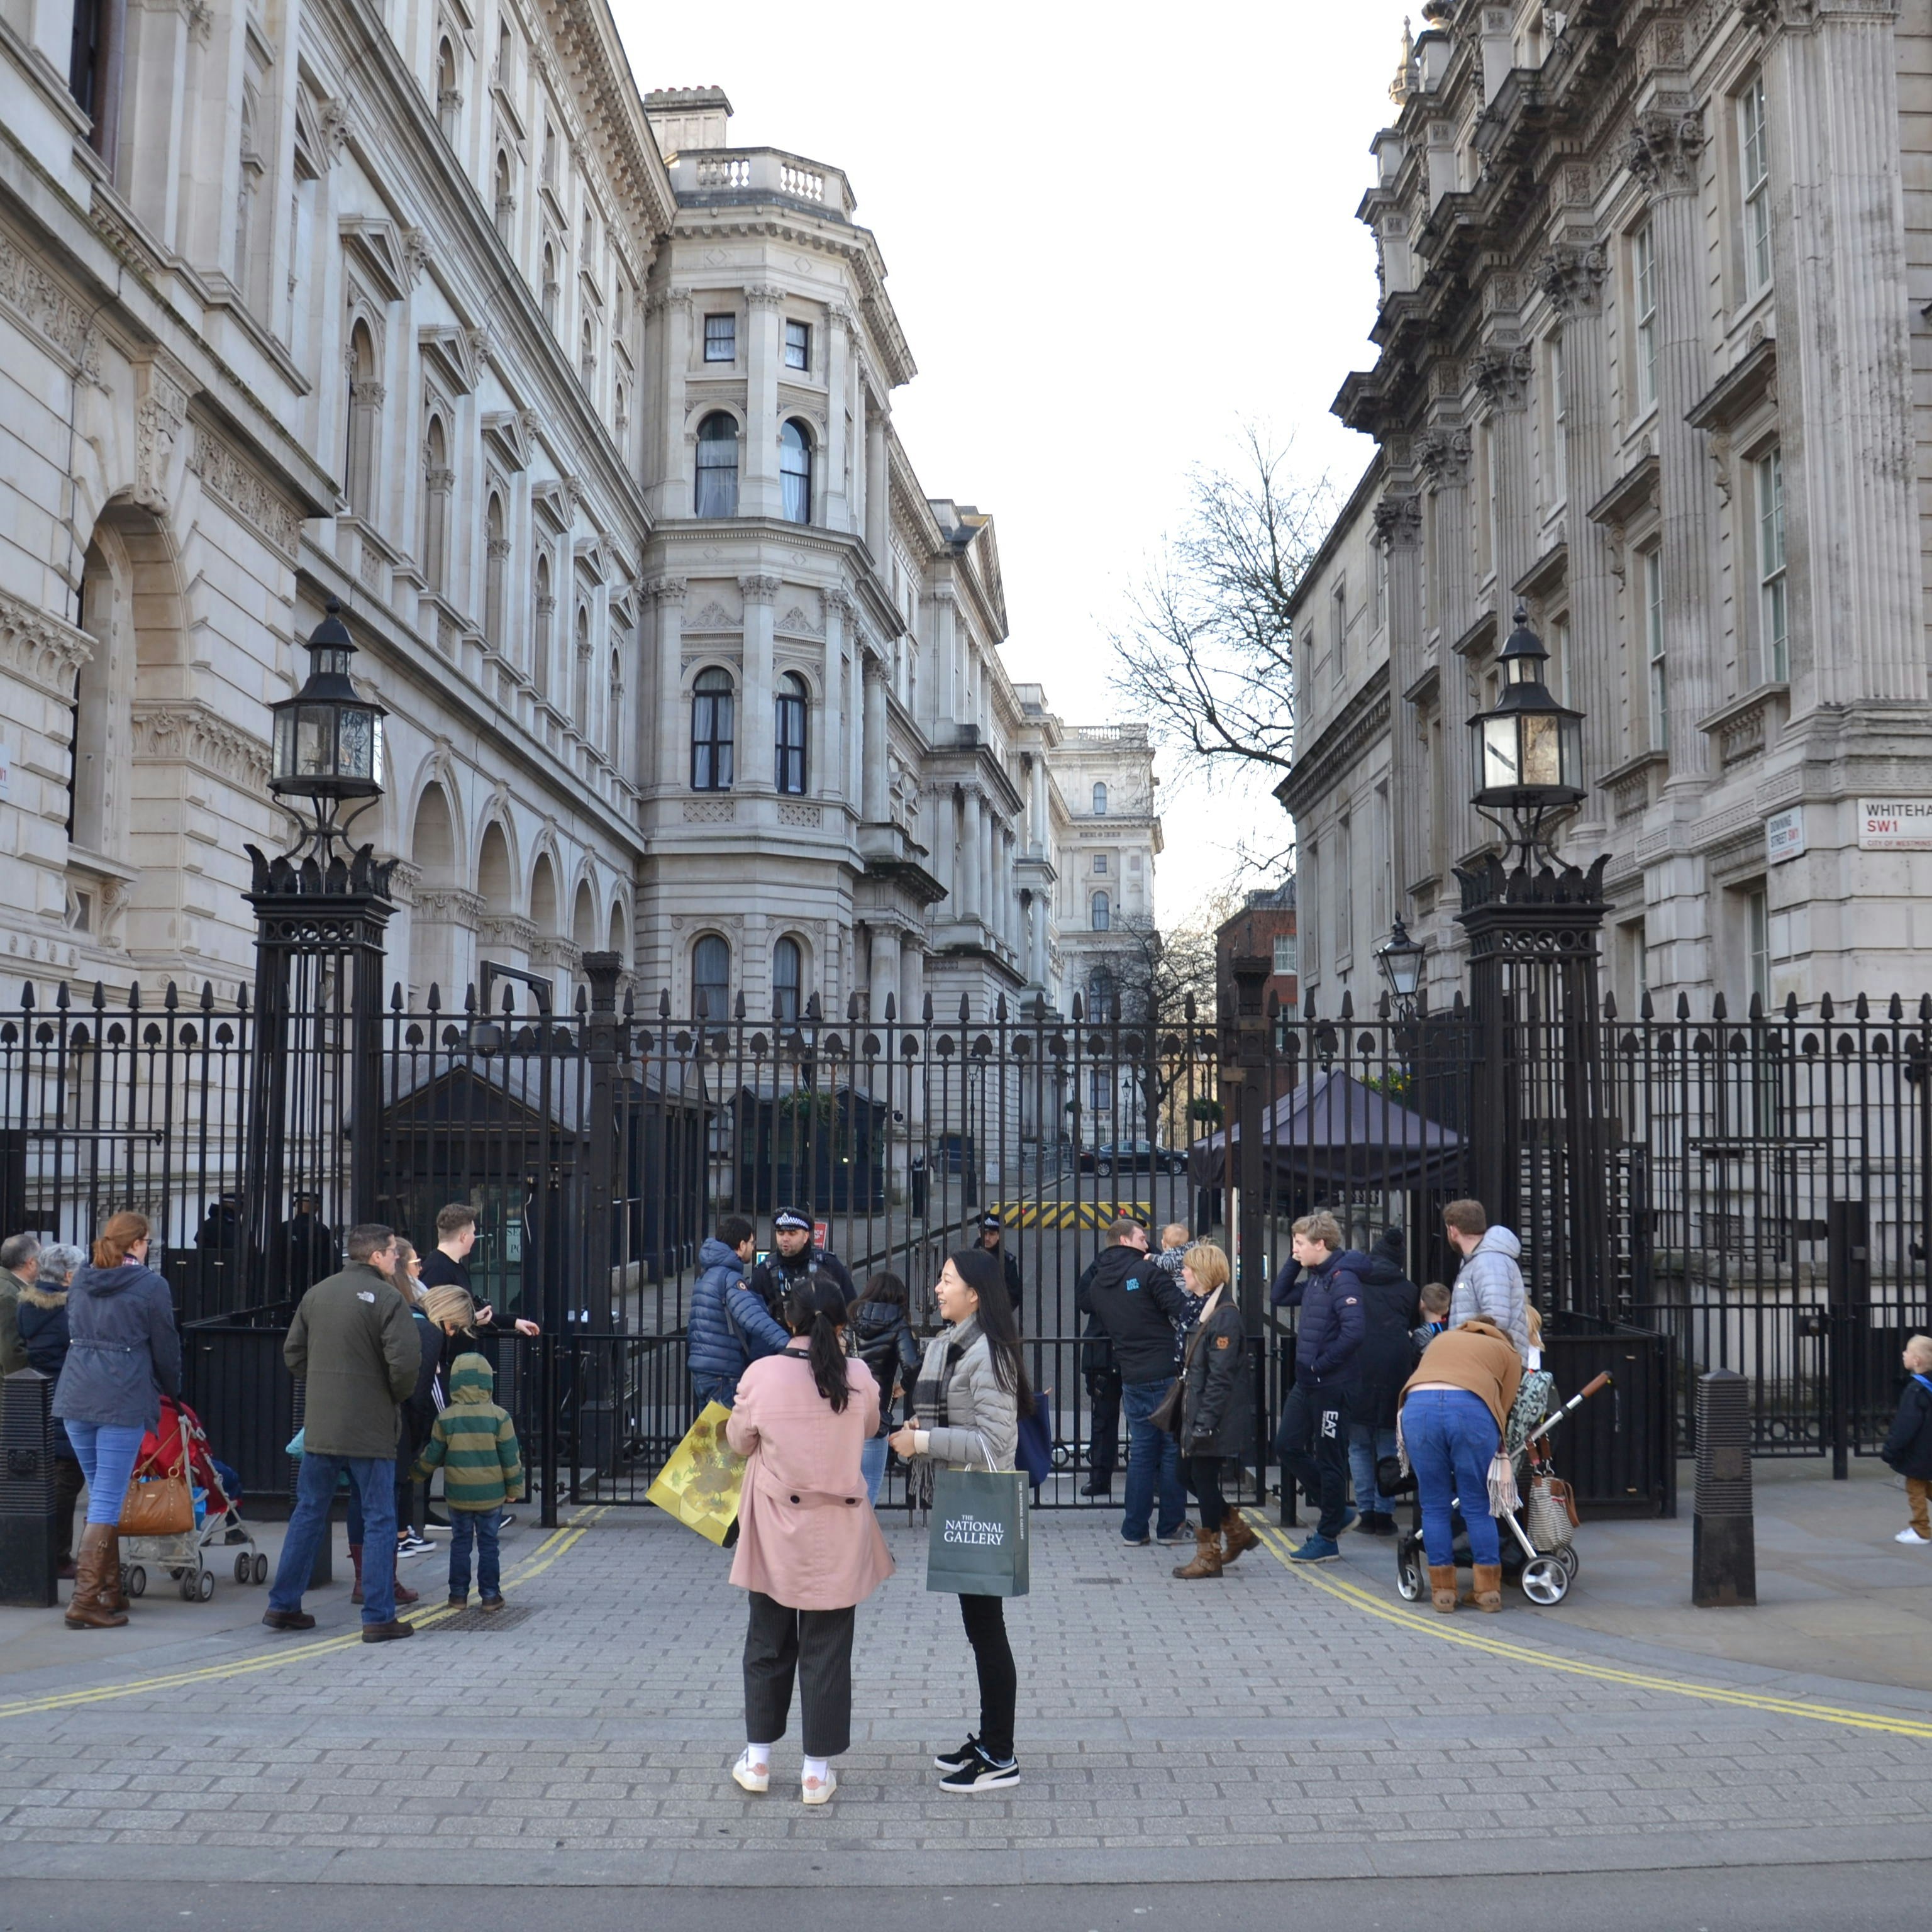 No 10 Downing Street, home of the Prime Minster.